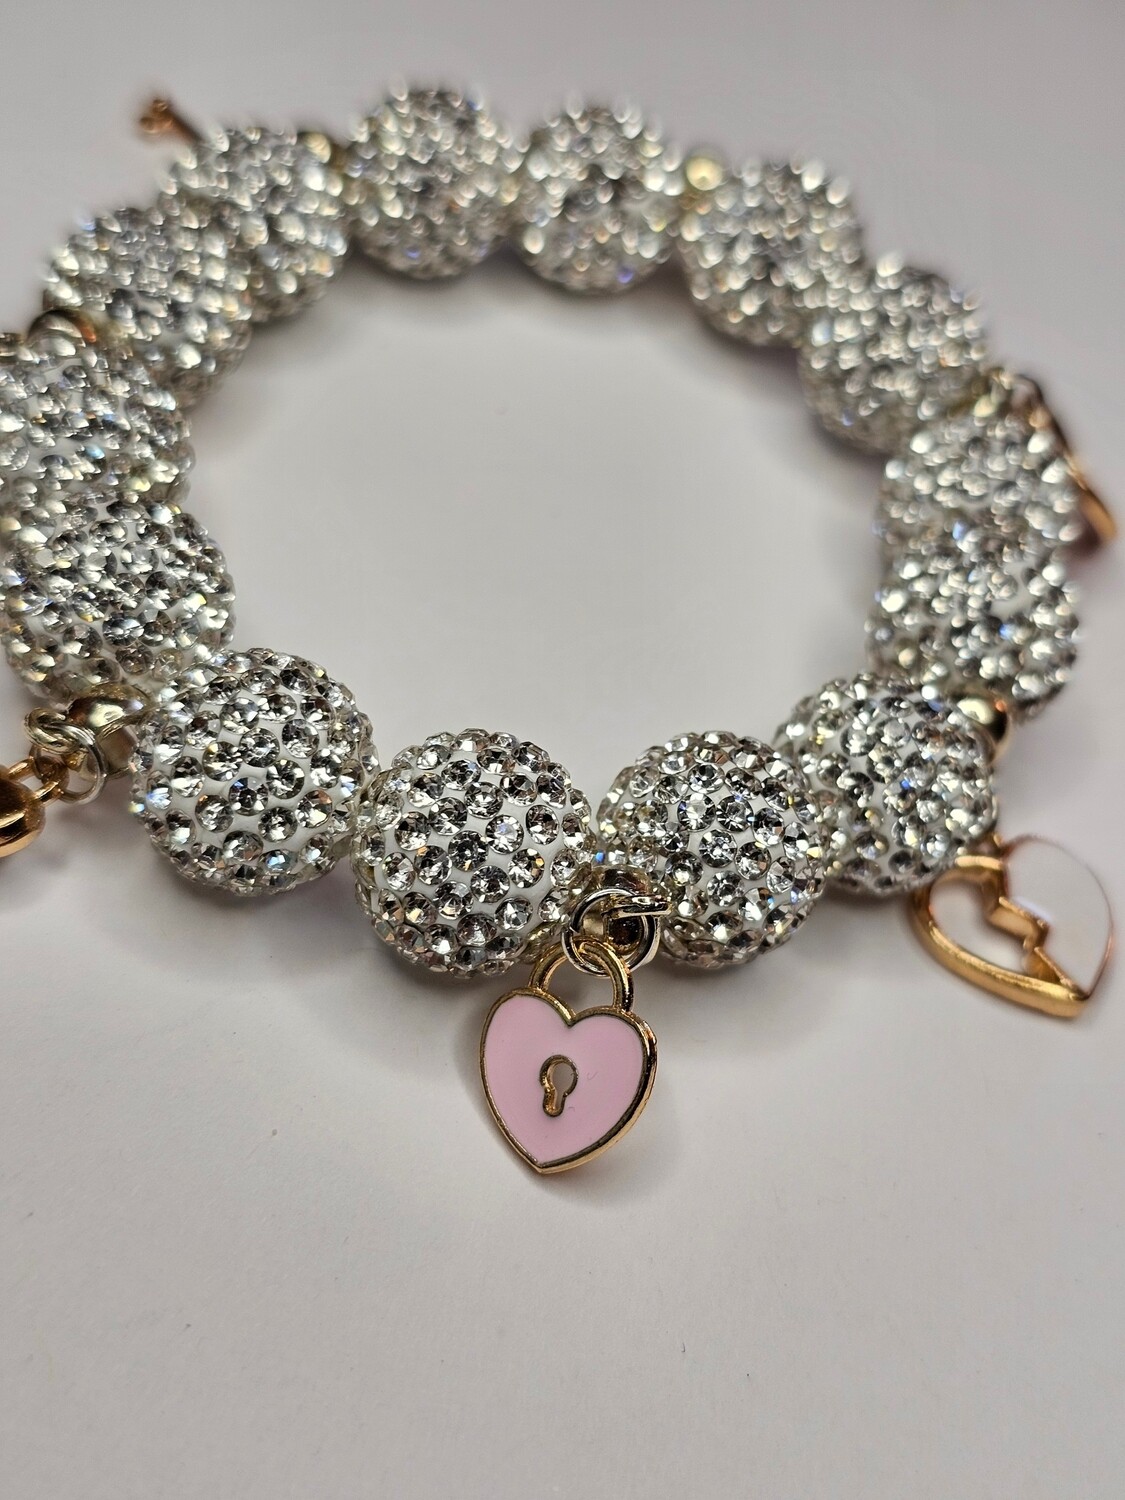 Handcrafted exclusively designed bracelets using high-quality beads and charms from Tru Treasures. 